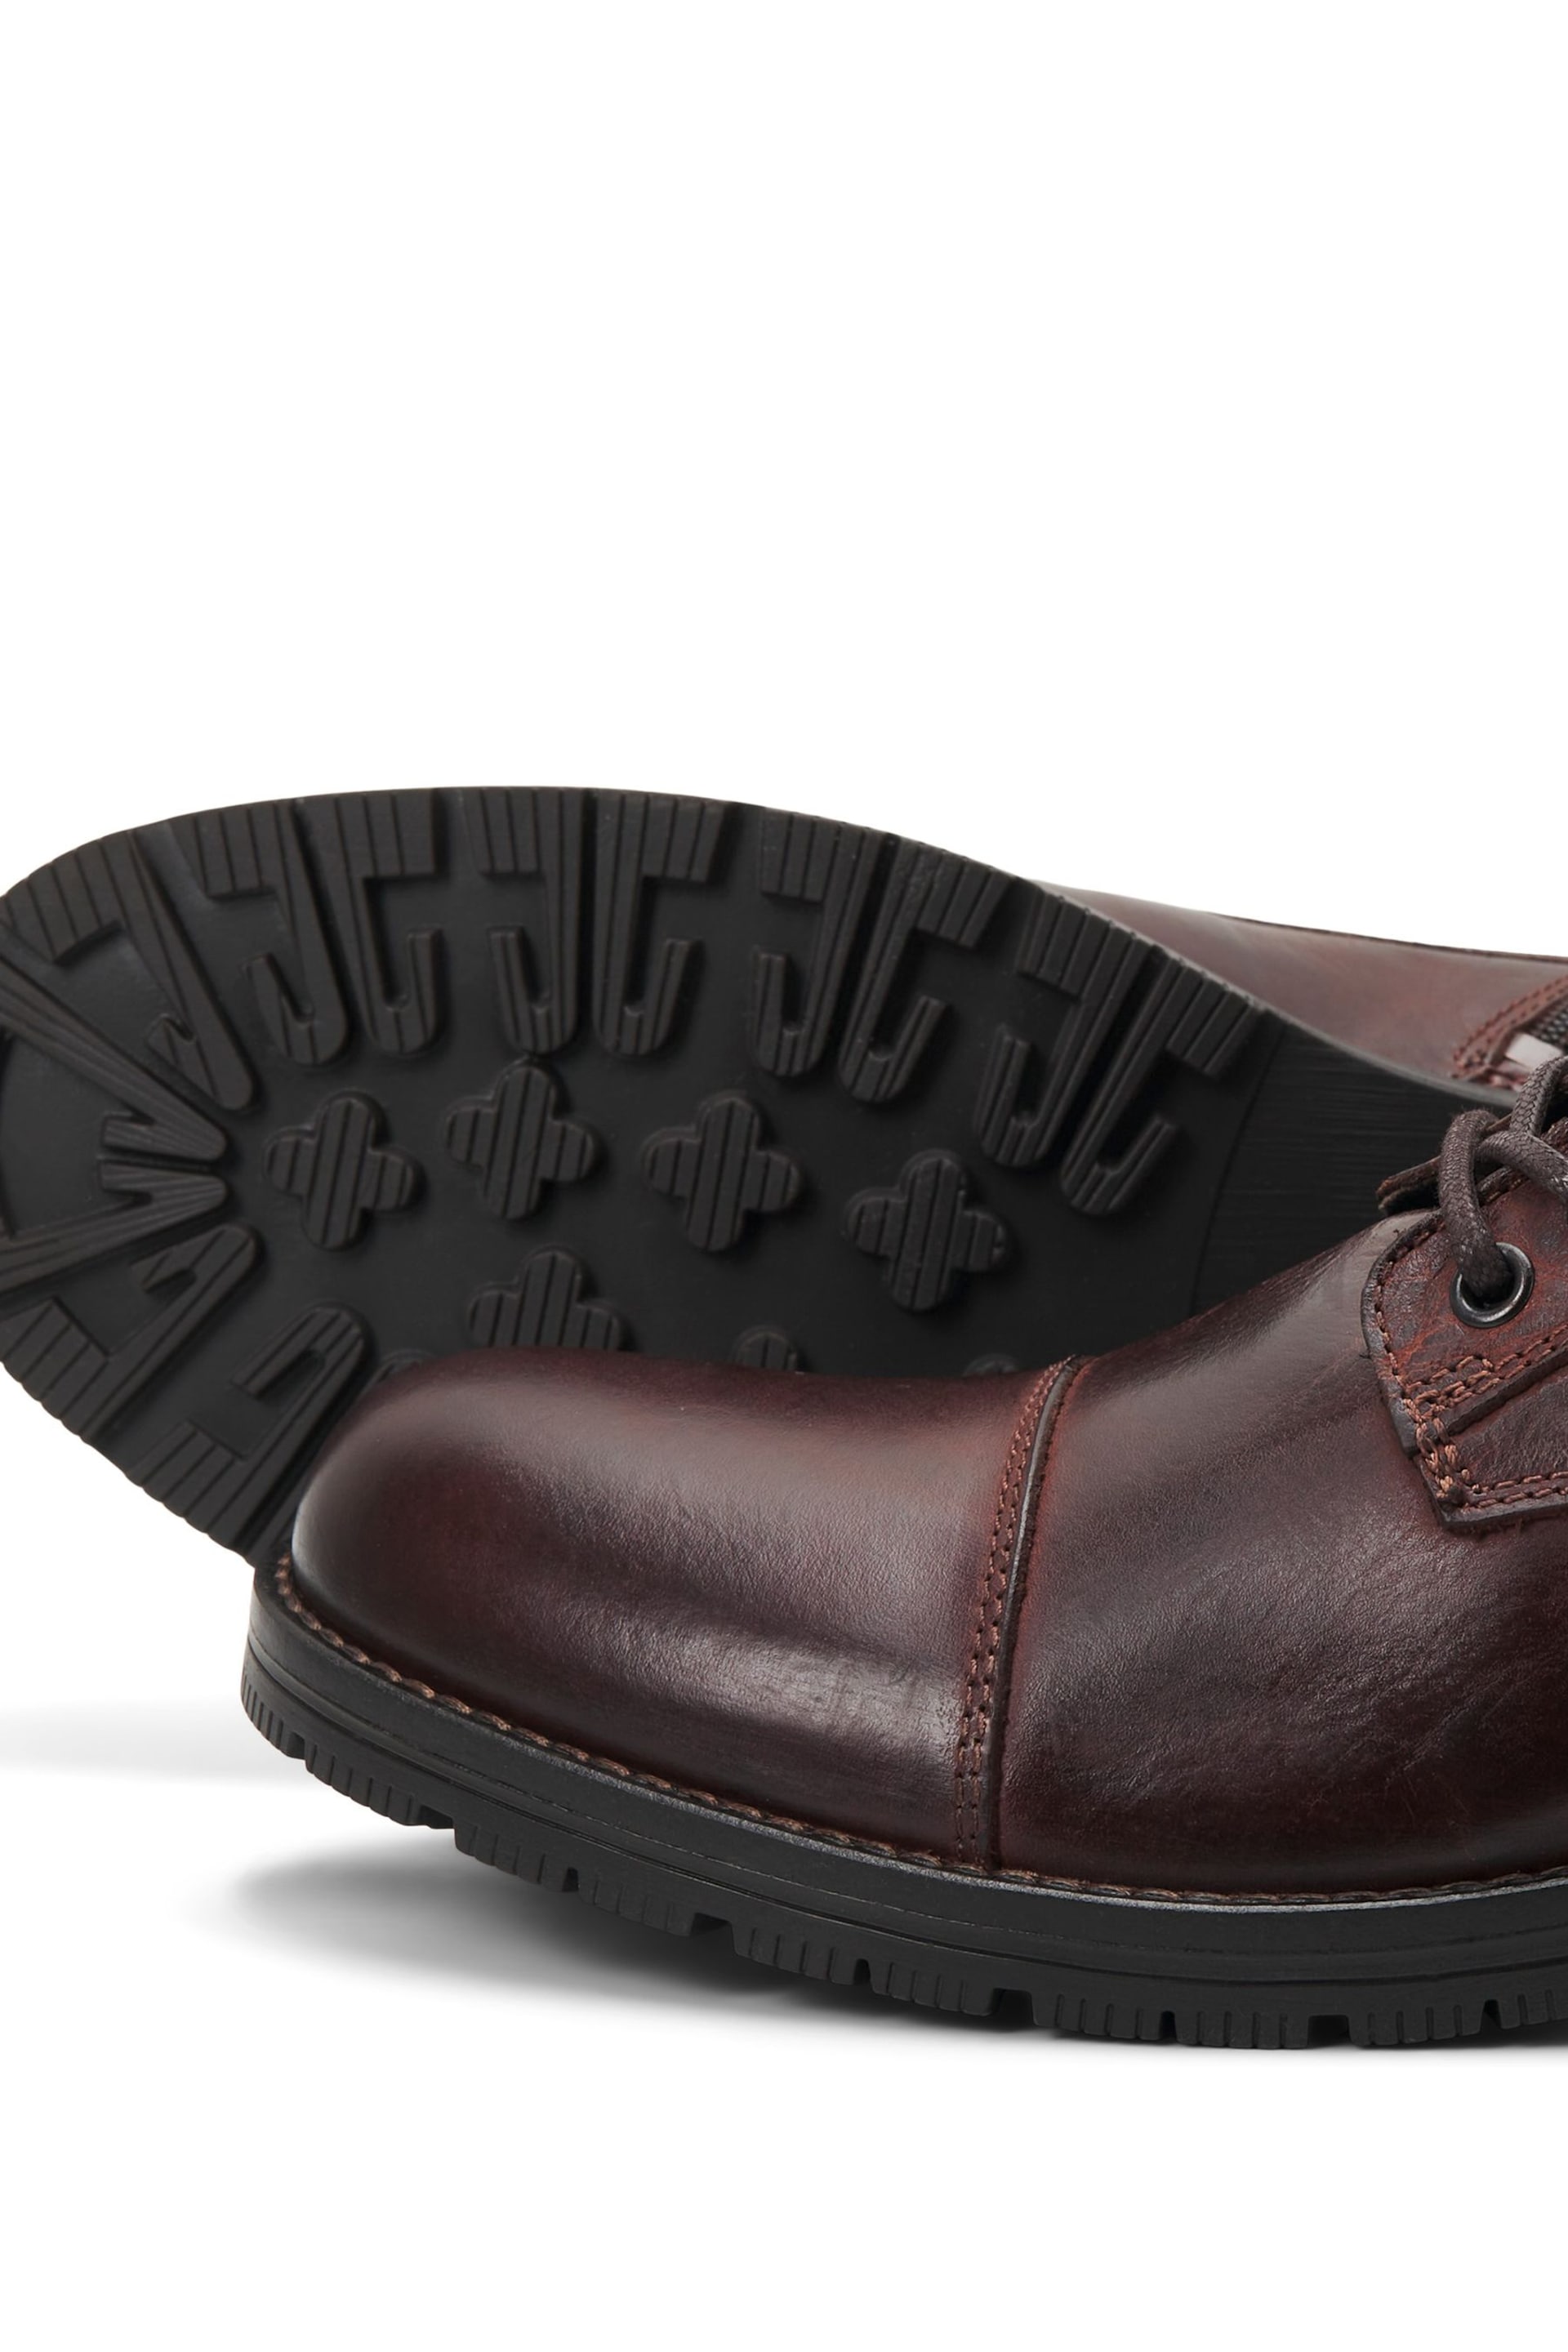 JACK & JONES Brown Leather Boots - Image 5 of 6